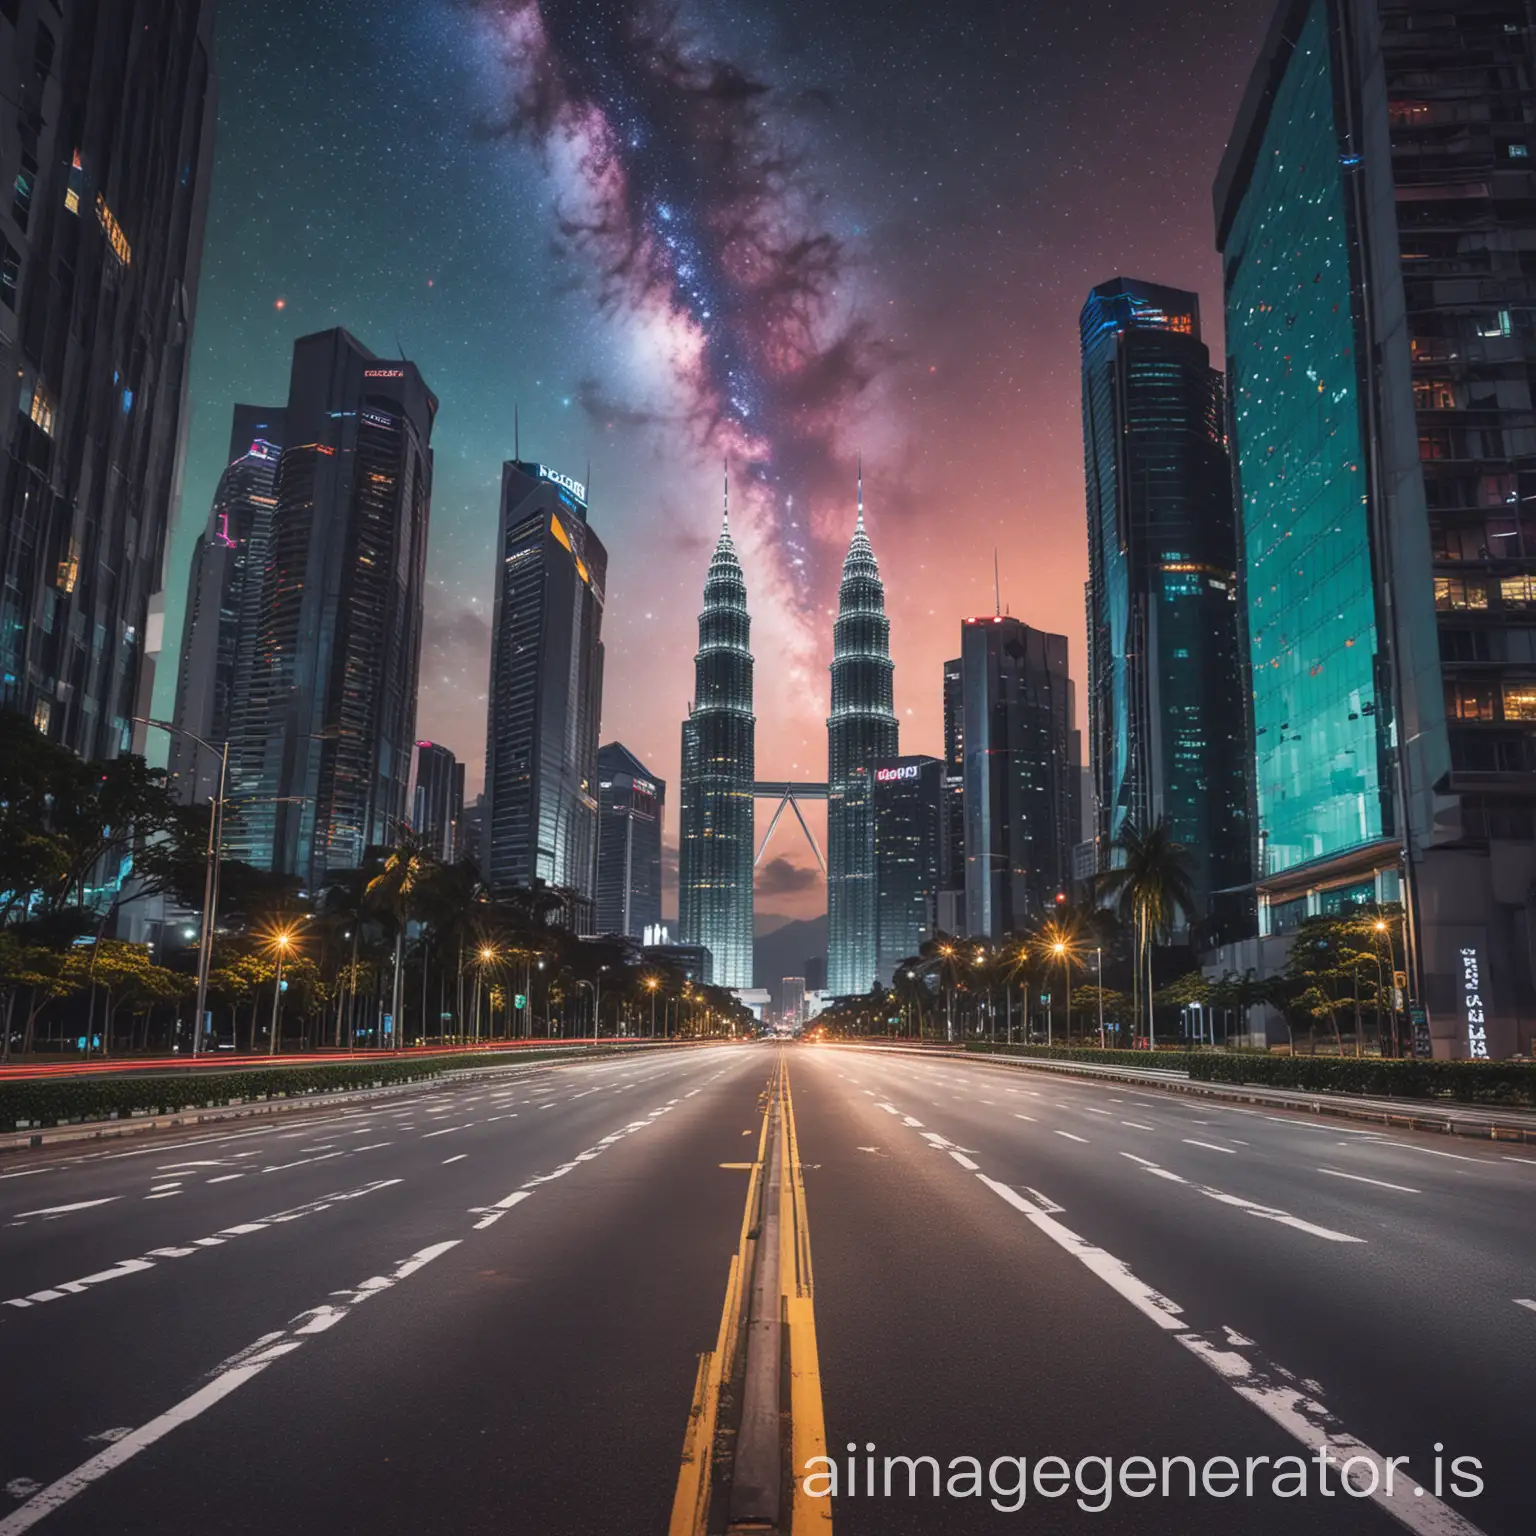 colouful urban city empty roadside. sky with stars and fantasy planet. modern architecture with KLCC and luala lumpur city. land took 35% from the image. empty street, a bit moving effect